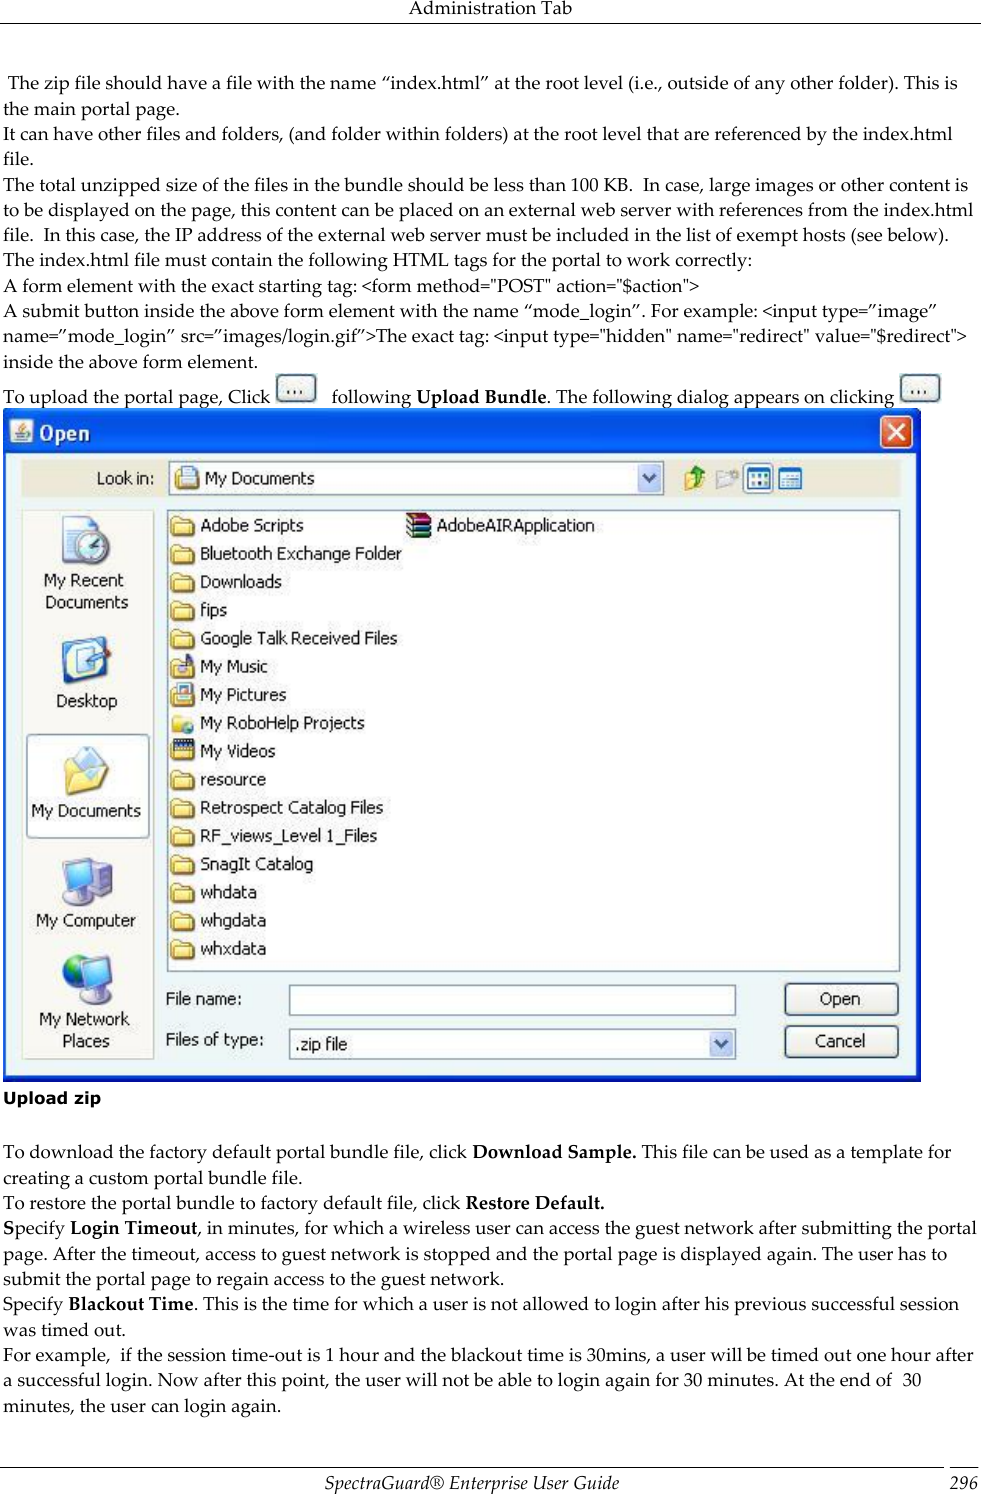 Administration Tab SpectraGuard®  Enterprise User Guide 296  The zip file should have a file with the name “index.html” at the root level (i.e., outside of any other folder). This is the main portal page. It can have other files and folders, (and folder within folders) at the root level that are referenced by the index.html file. The total unzipped size of the files in the bundle should be less than 100 KB.  In case, large images or other content is to be displayed on the page, this content can be placed on an external web server with references from the index.html file.  In this case, the IP address of the external web server must be included in the list of exempt hosts (see below). The index.html file must contain the following HTML tags for the portal to work correctly: A form element with the exact starting tag: &lt;form method=&quot;POST&quot; action=&quot;$action&quot;&gt; A submit button inside the above form element with the name “mode_login”. For example: &lt;input type=”image” name=”mode_login” src=”images/login.gif”&gt;The exact tag: &lt;input type=&quot;hidden&quot; name=&quot;redirect&quot; value=&quot;$redirect&quot;&gt; inside the above form element. To upload the portal page, Click     following Upload Bundle. The following dialog appears on clicking    Upload zip   To download the factory default portal bundle file, click Download Sample. This file can be used as a template for creating a custom portal bundle file. To restore the portal bundle to factory default file, click Restore Default. Specify Login Timeout, in minutes, for which a wireless user can access the guest network after submitting the portal page. After the timeout, access to guest network is stopped and the portal page is displayed again. The user has to submit the portal page to regain access to the guest network. Specify Blackout Time. This is the time for which a user is not allowed to login after his previous successful session was timed out. For example,  if the session time-out is 1 hour and the blackout time is 30mins, a user will be timed out one hour after a successful login. Now after this point, the user will not be able to login again for 30 minutes. At the end of  30 minutes, the user can login again. 